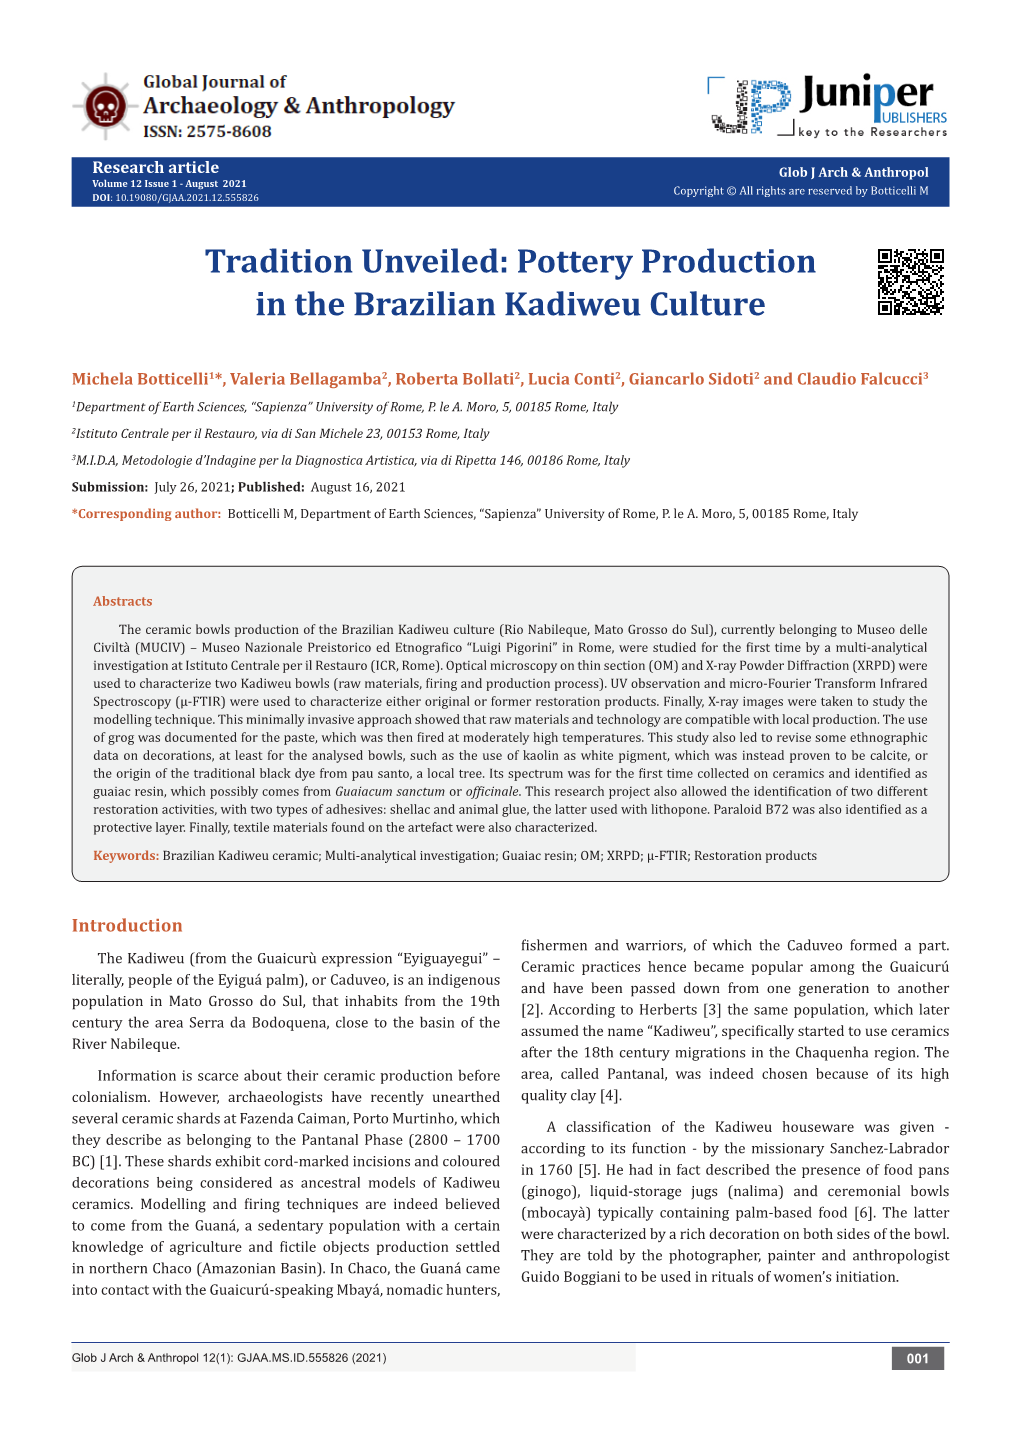 Tradition Unveiled: Pottery Production in the Brazilian Kadiweu Culture